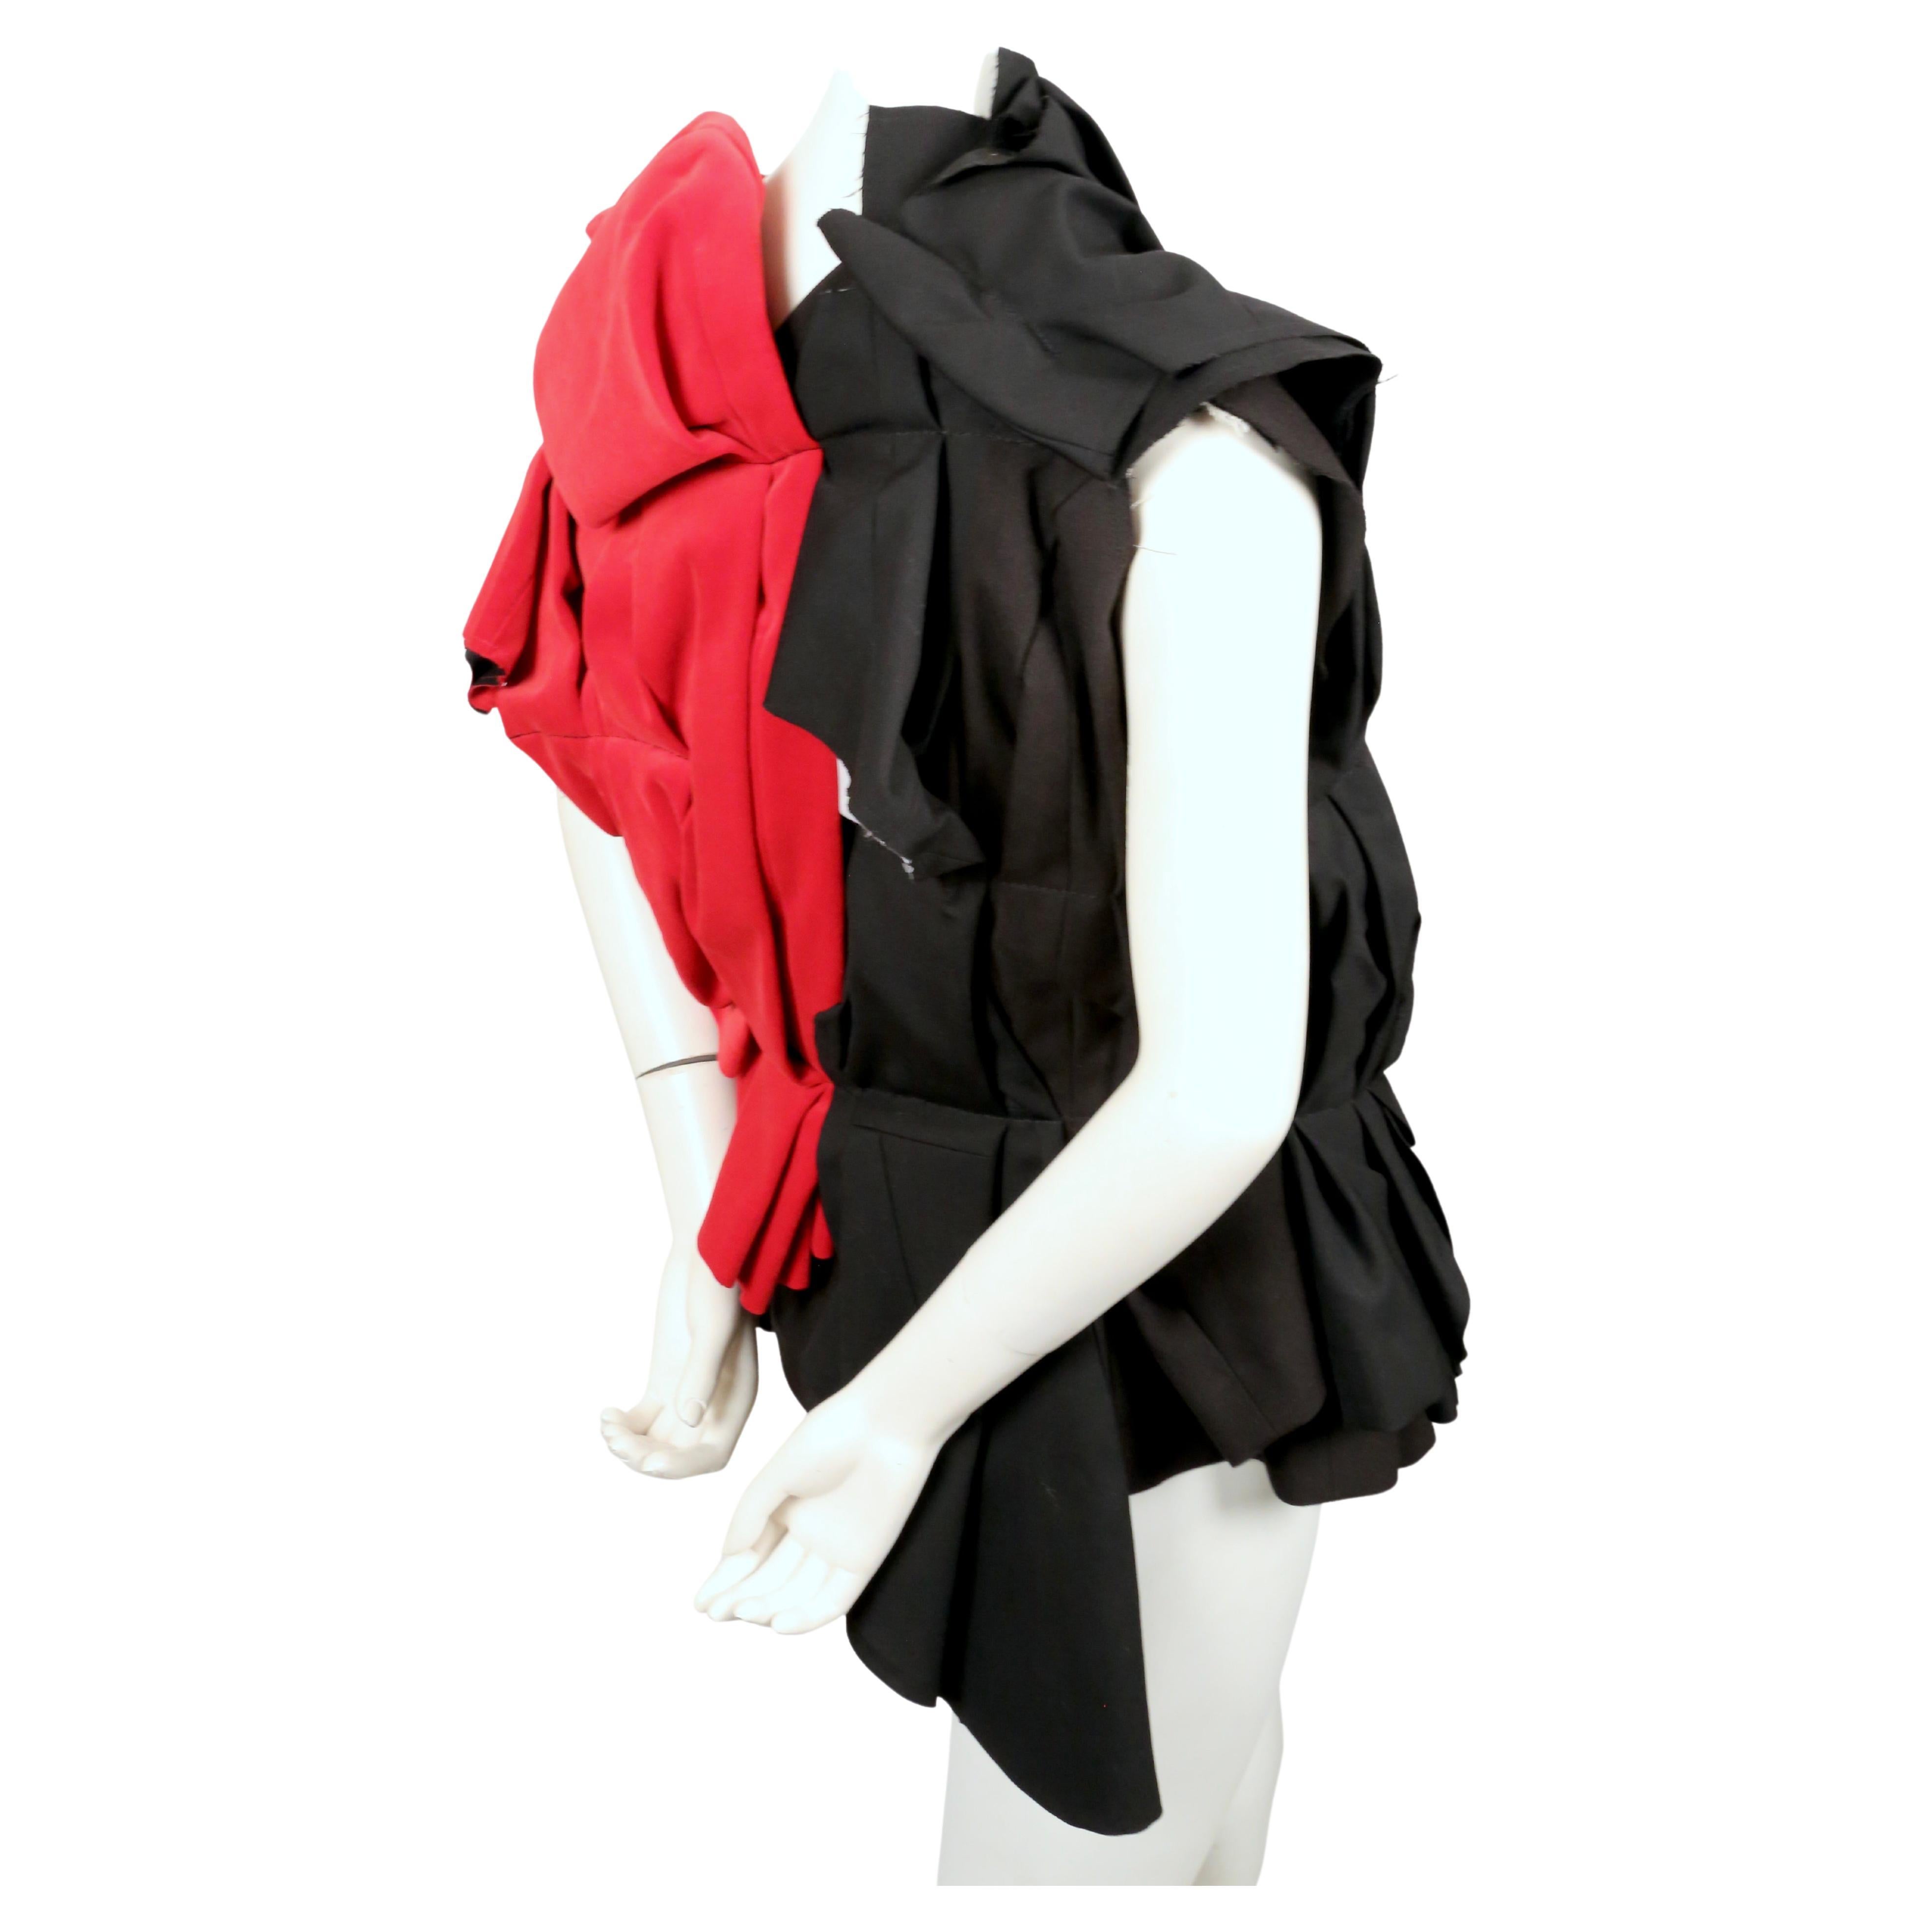 2013 COMME DES GARCONS black and red RUNWAY jacket For Sale 5